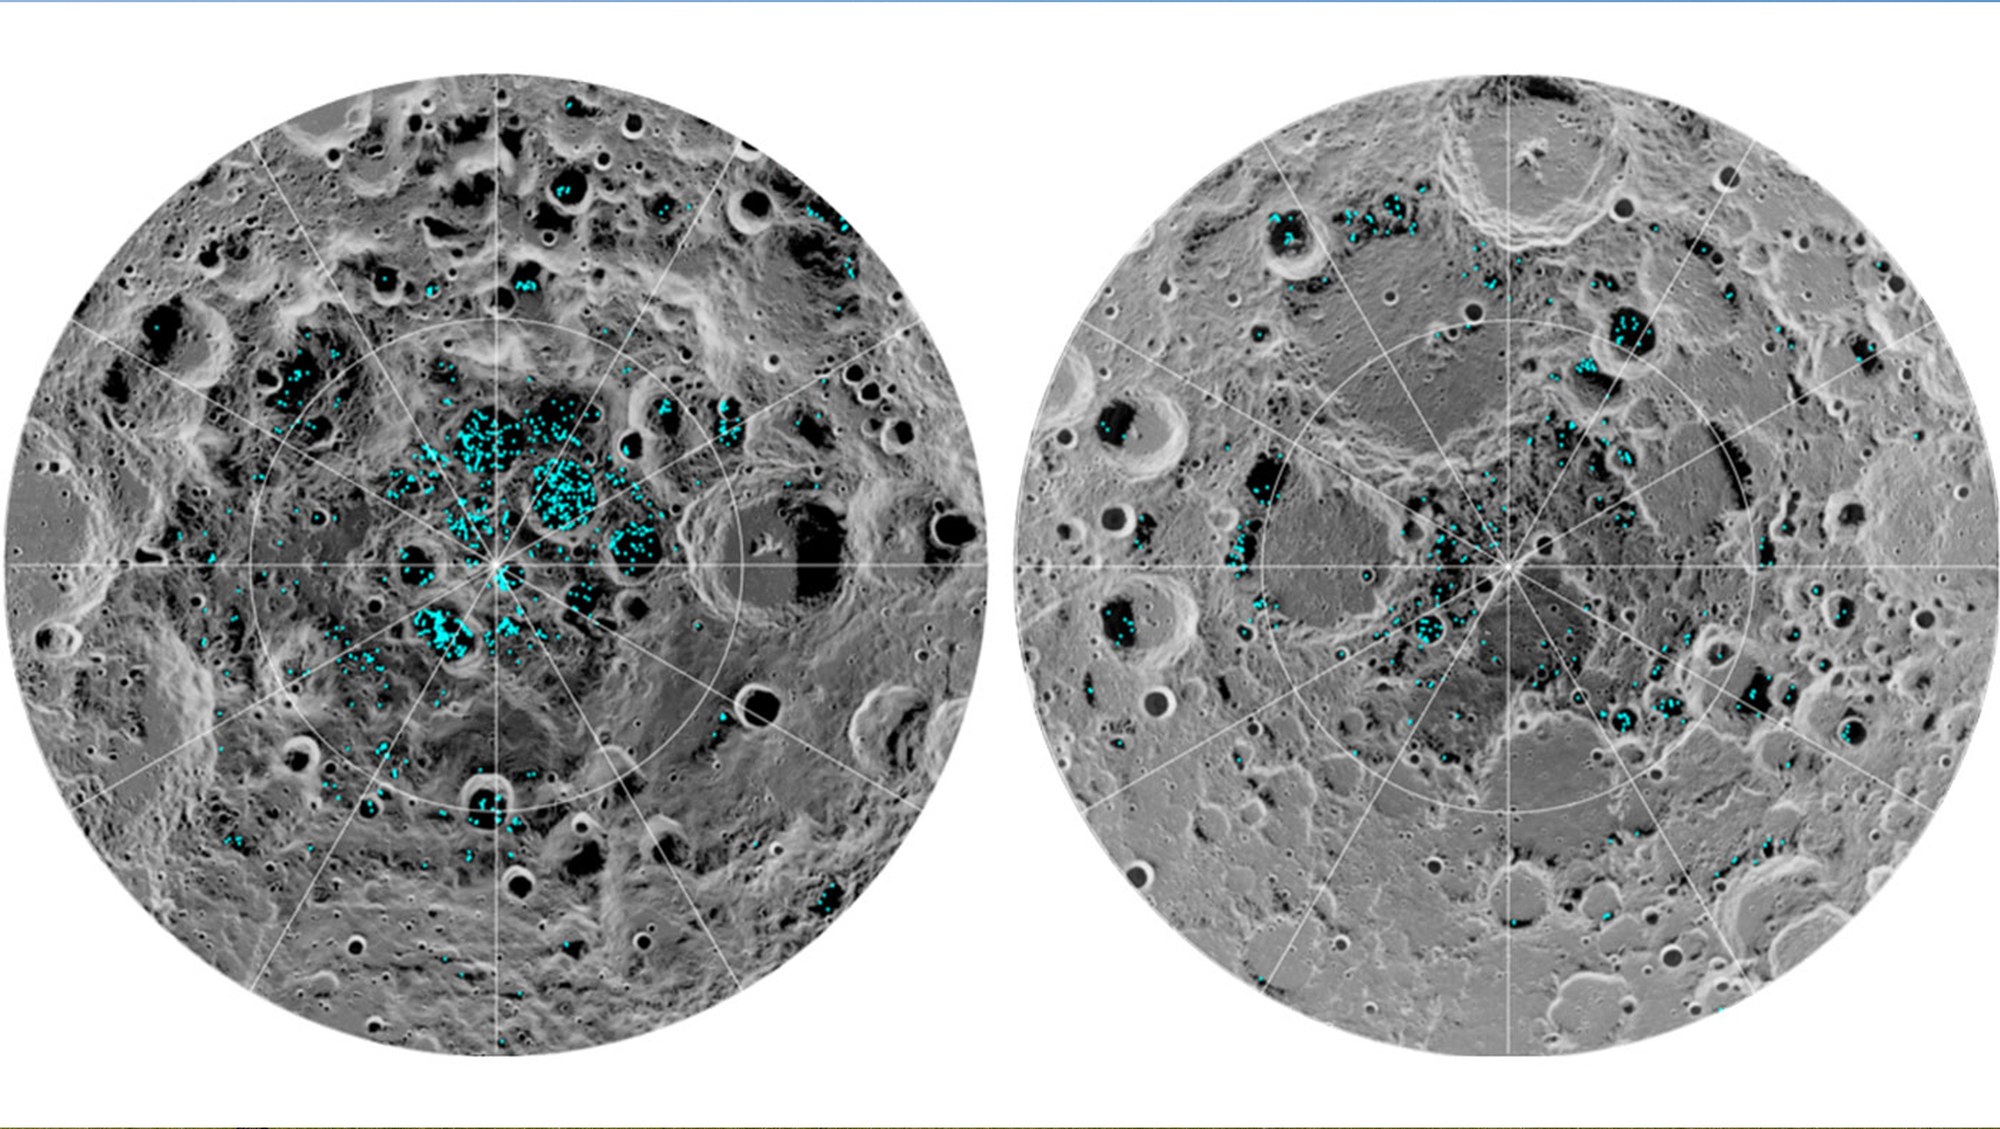 Distribution of ice at the South Pole (left) and North Pole (right) of the Moon